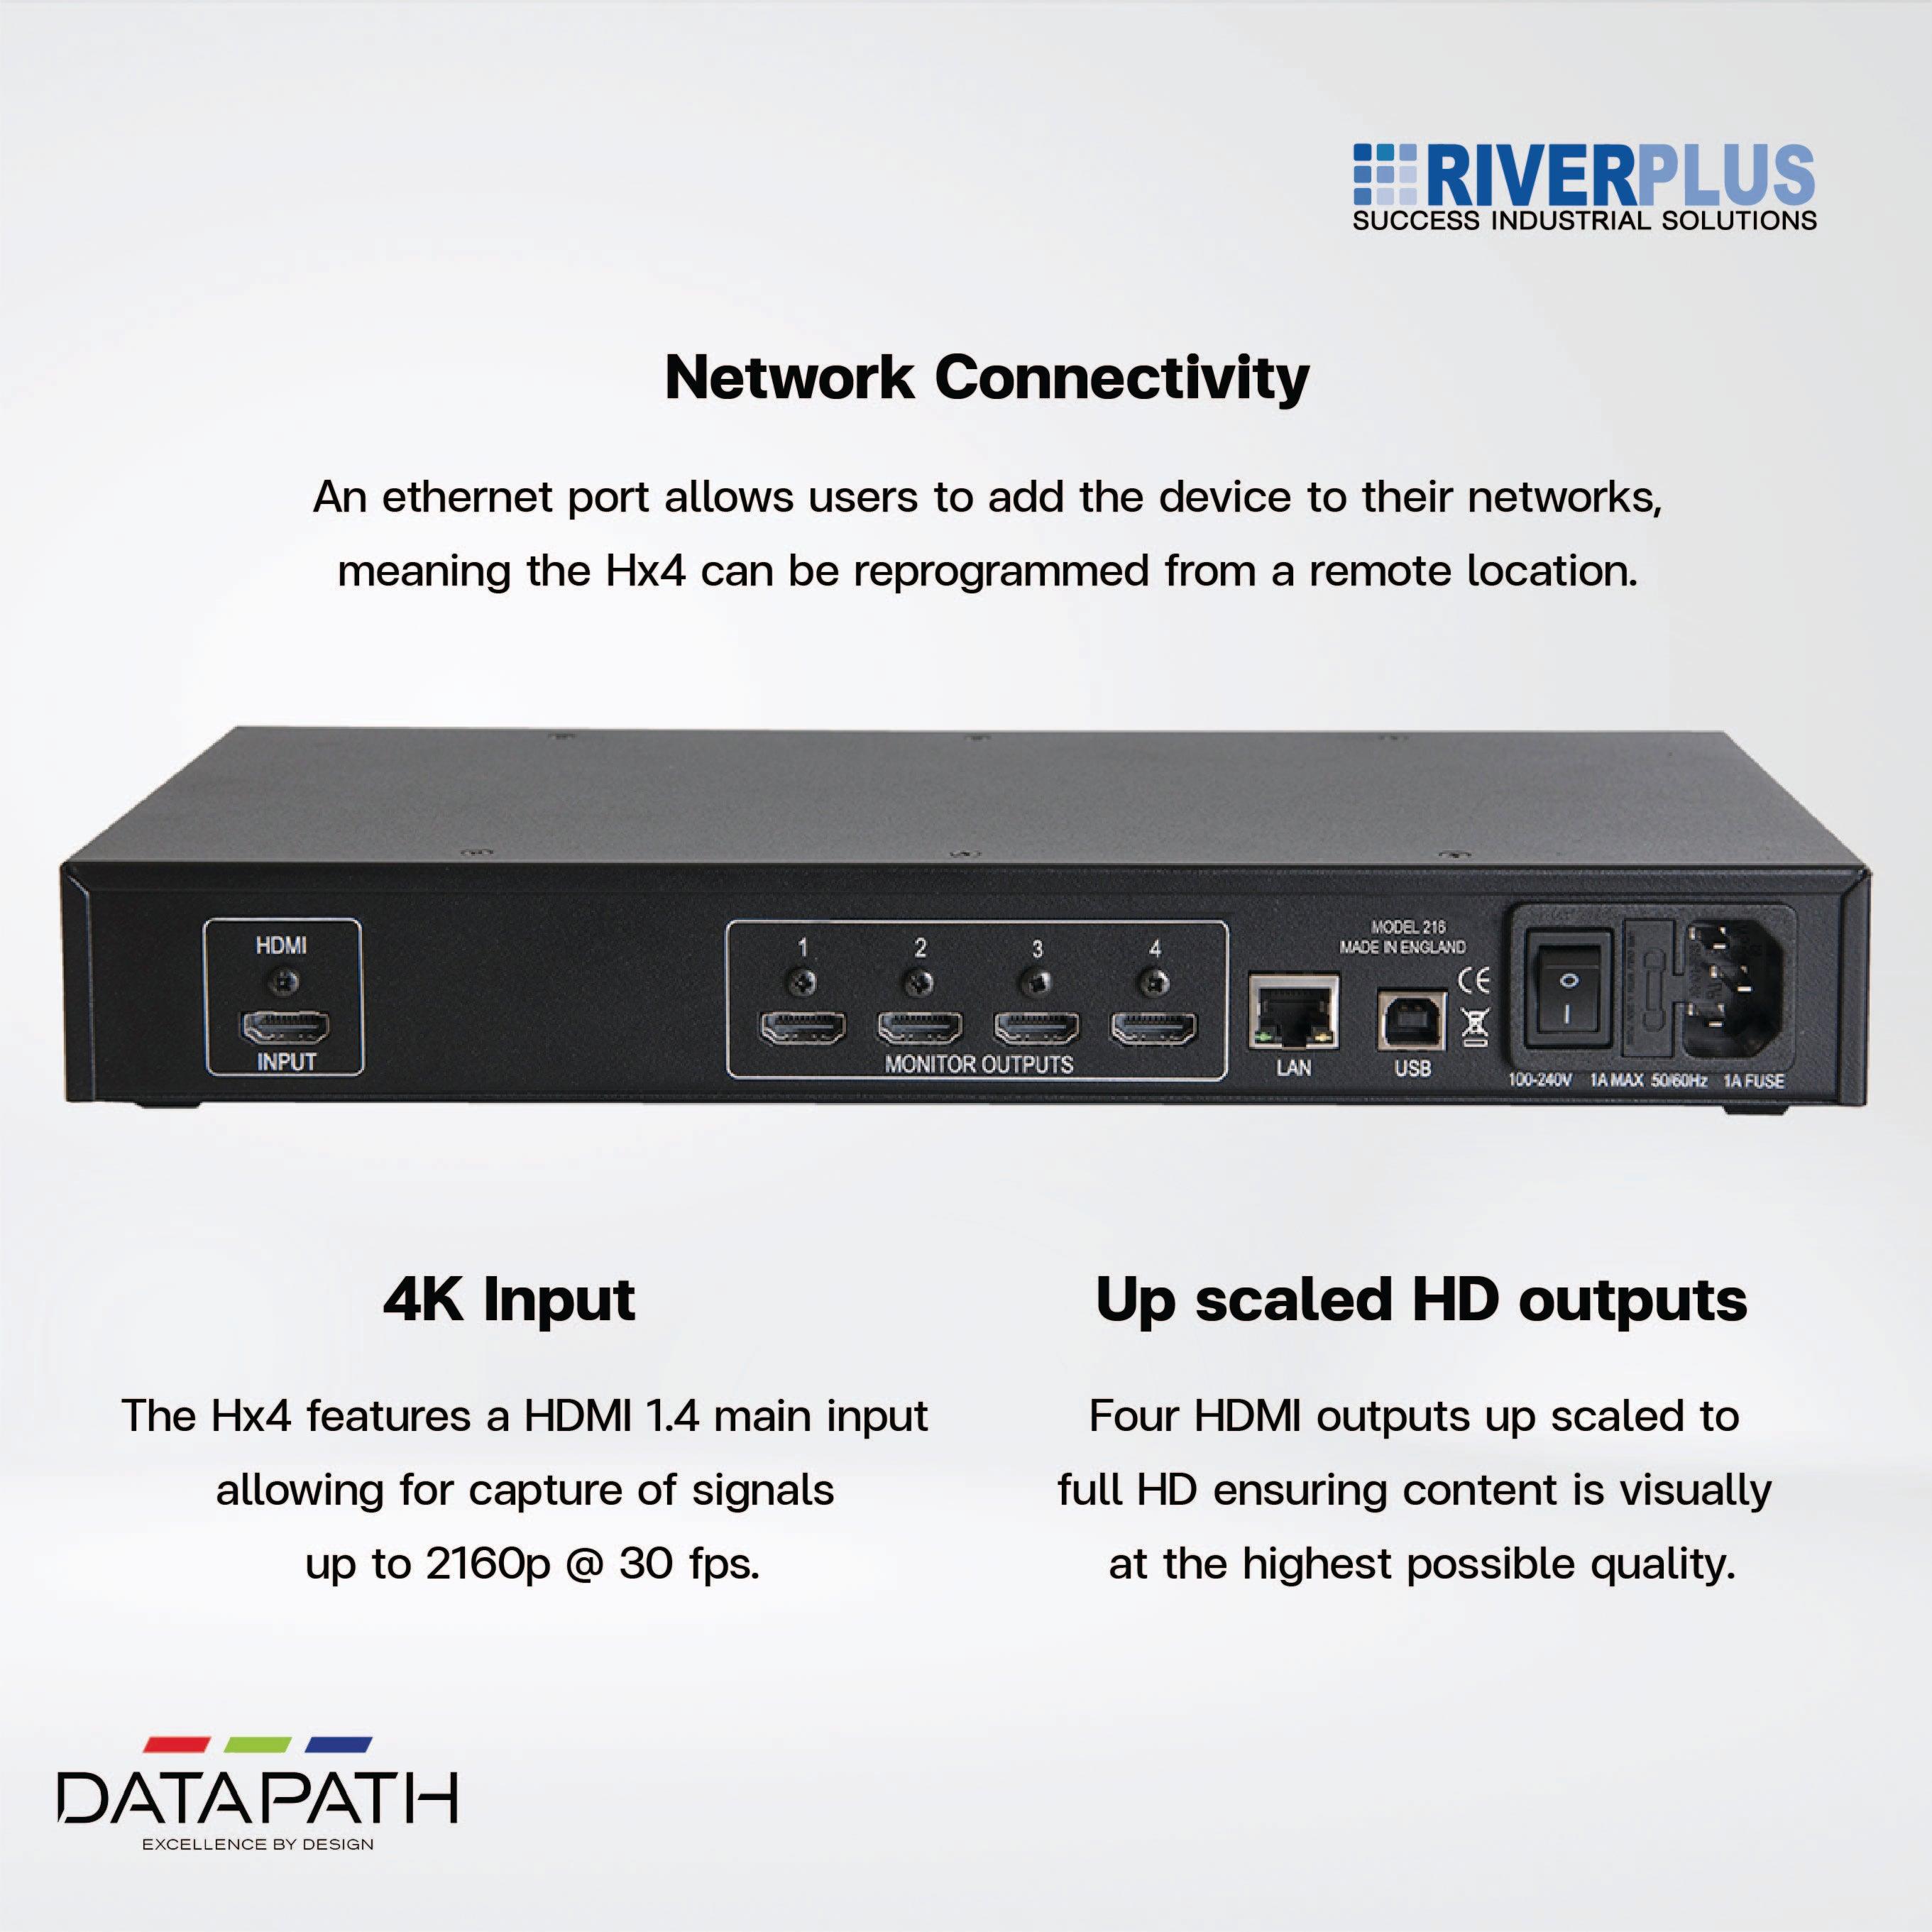 Hx4 Stand-alone controller with the capacity to run a single 4K HDMI source across four HD outputs - Riverplus